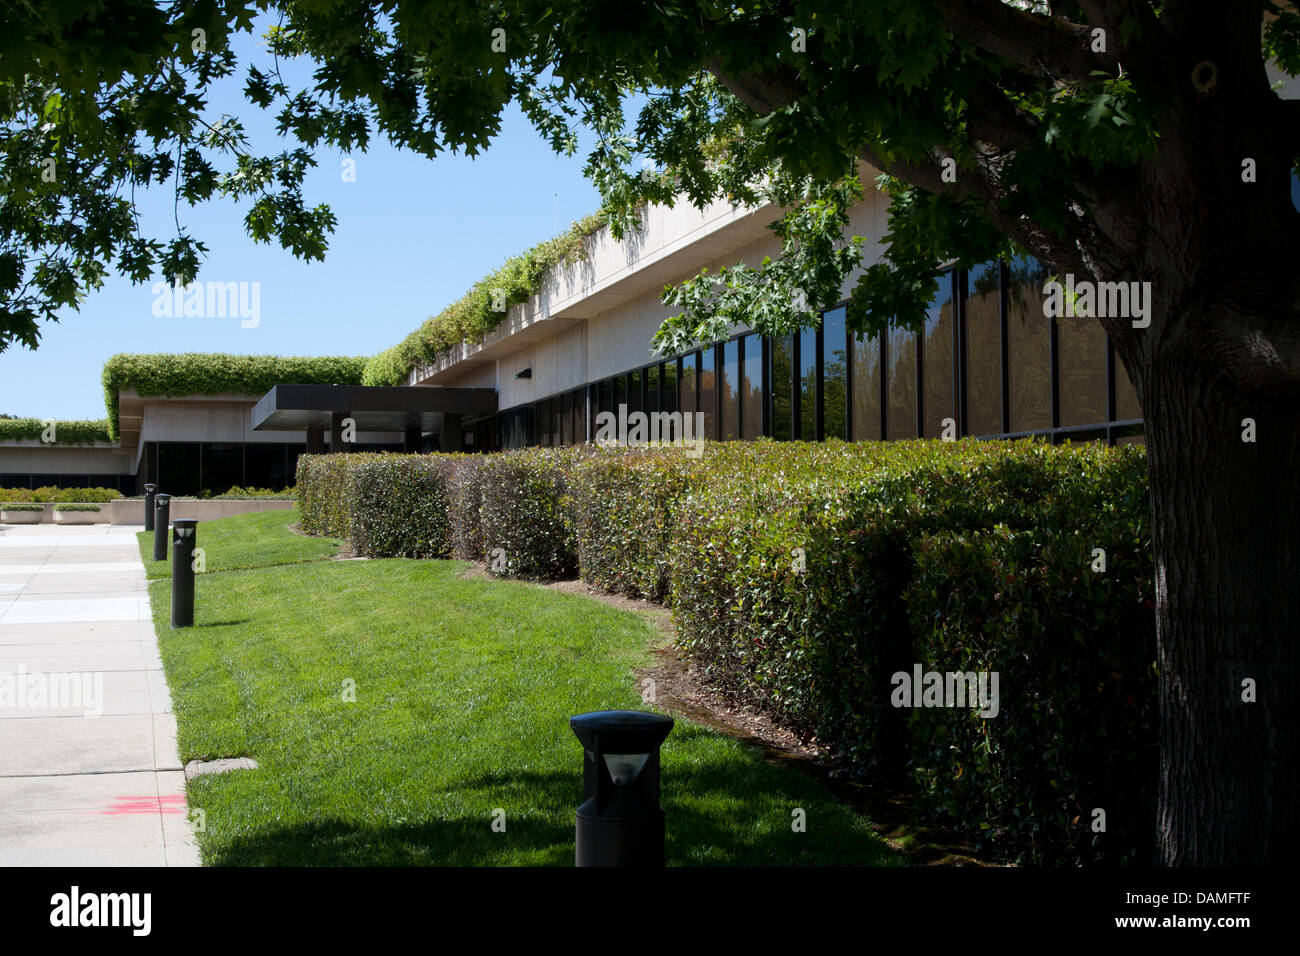 The Picture Shows The Legendary Californian Research Center Xerox